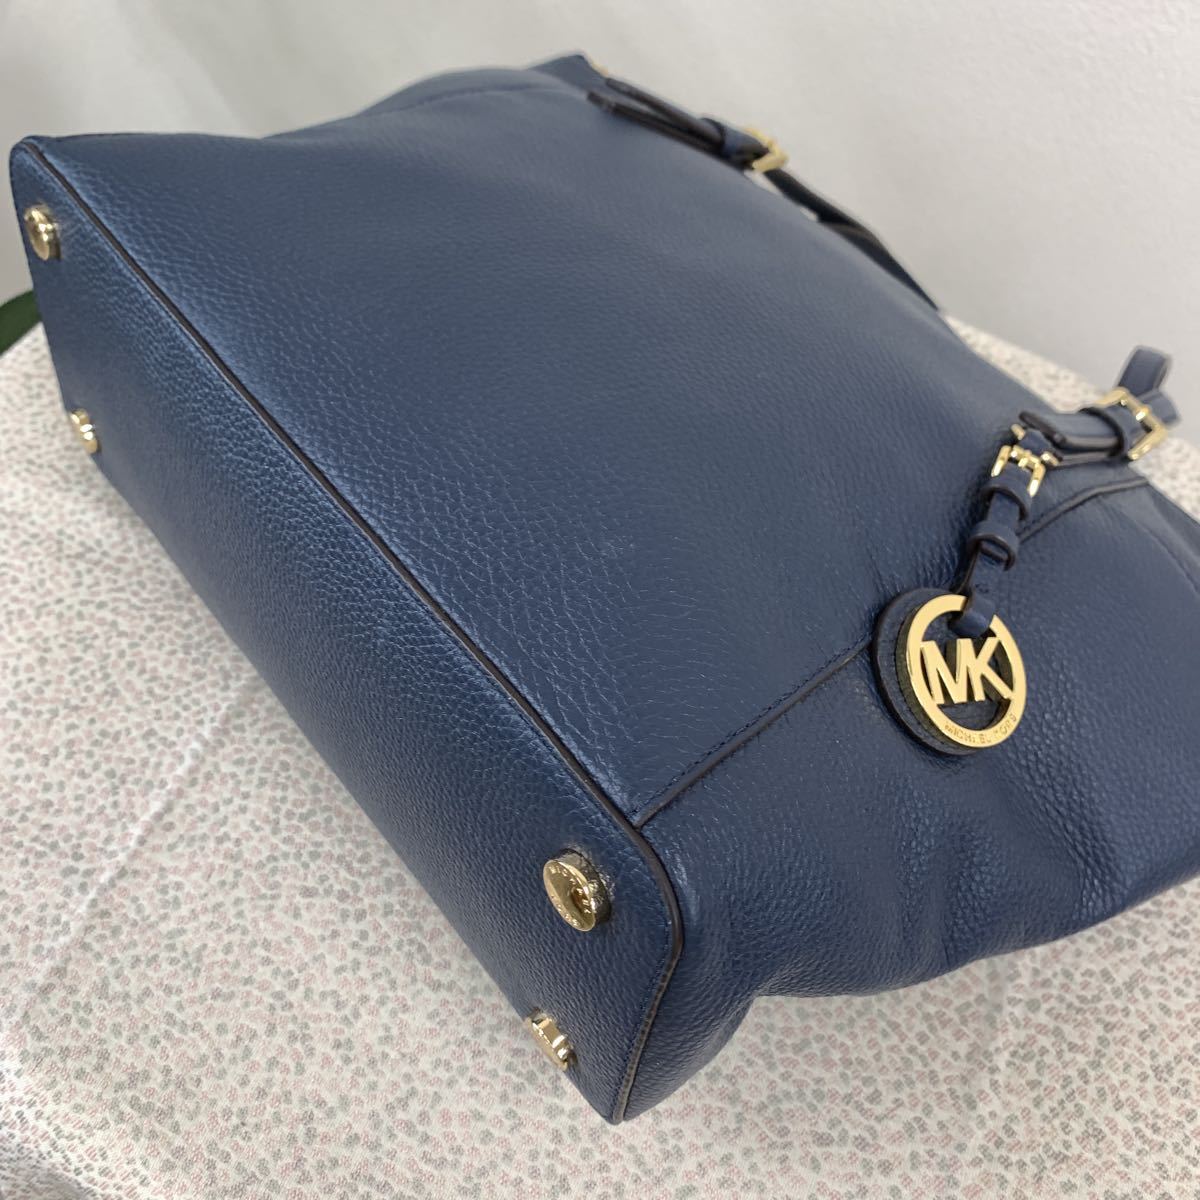  Michael Kors [MICHAEL KORS] on goods settled navy * fine quality cow leather material * shoulder tote bag * beautiful goods 